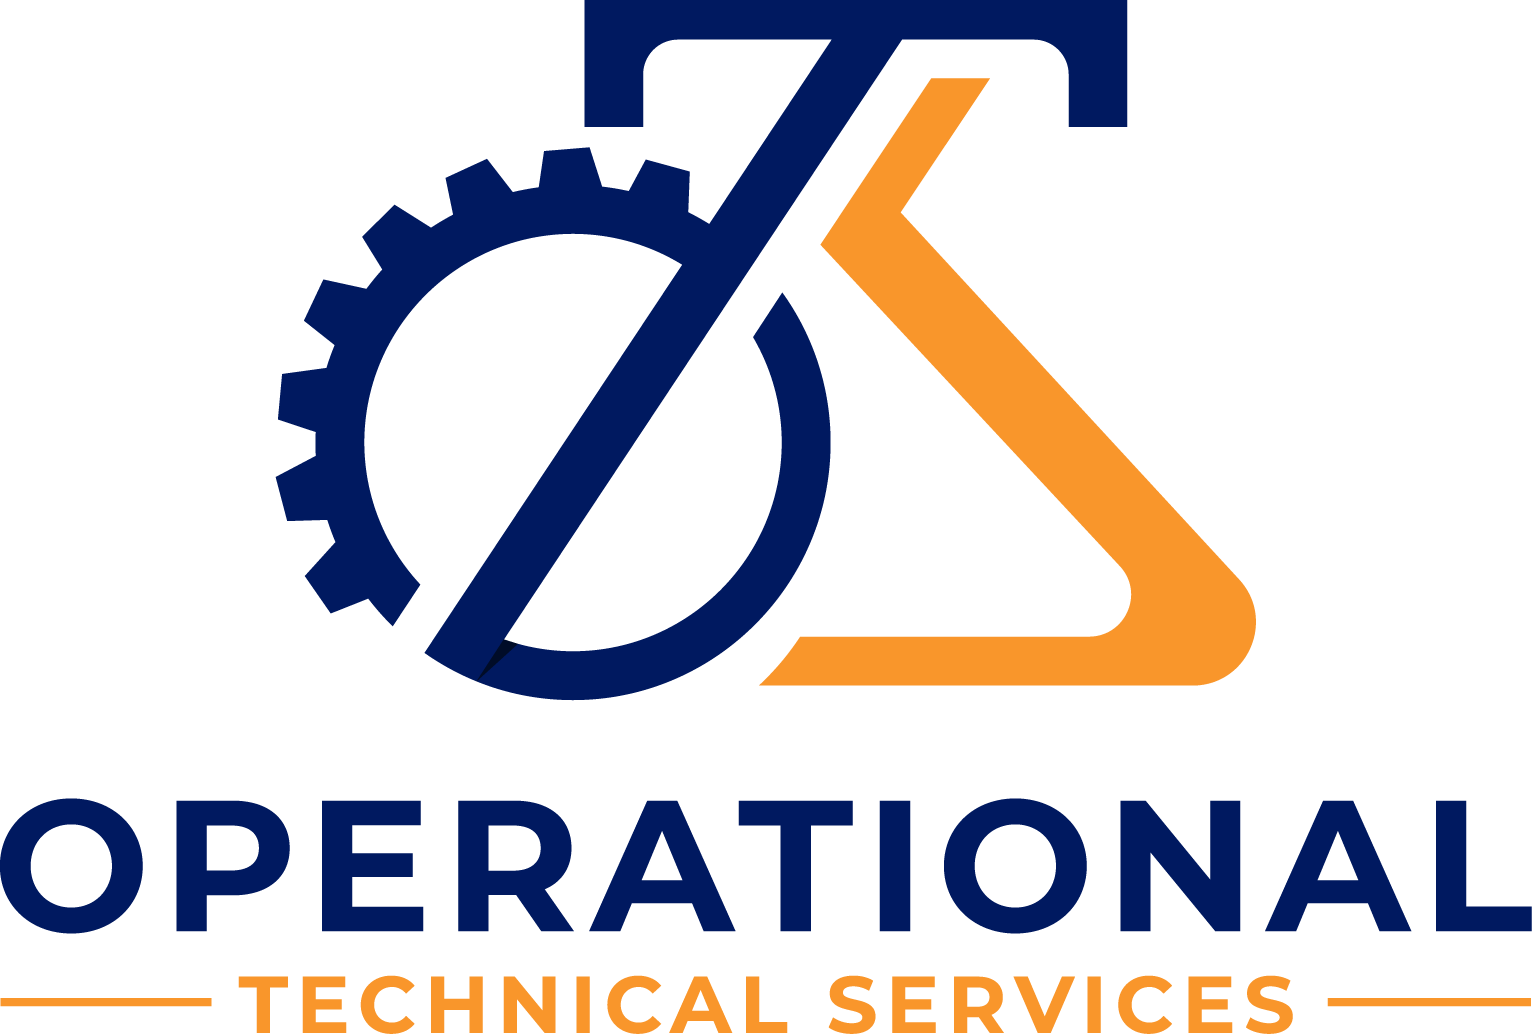 Operational Technical Services